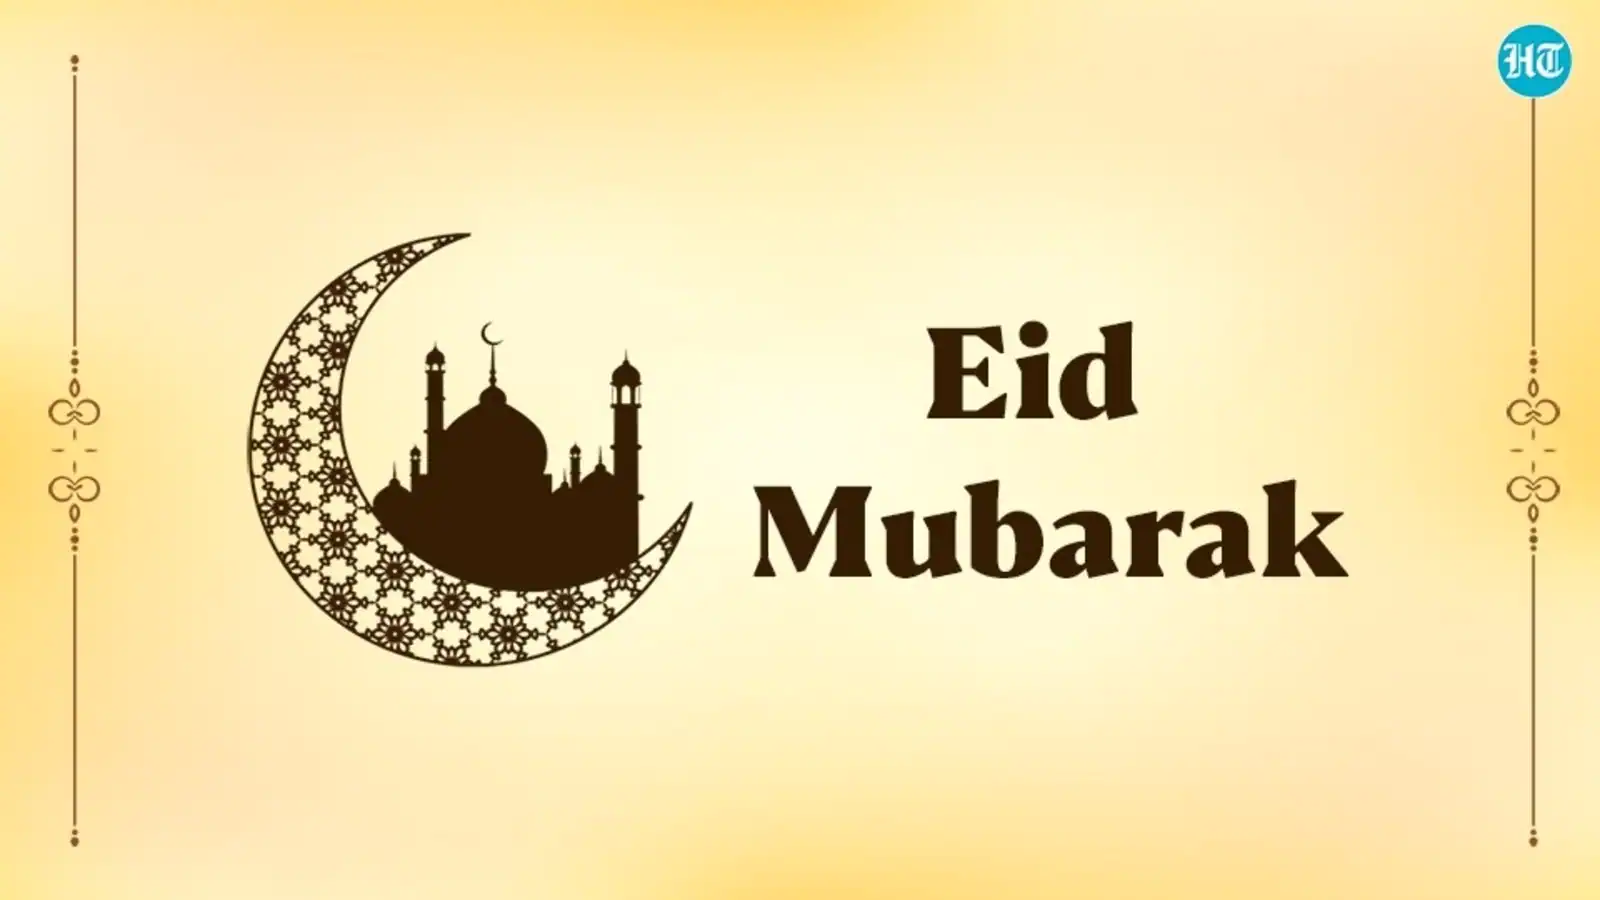 Eid Mubarak 2022: Best wishes, images, messages and greetings to share with loved ones on Eid-Ul-Fitr